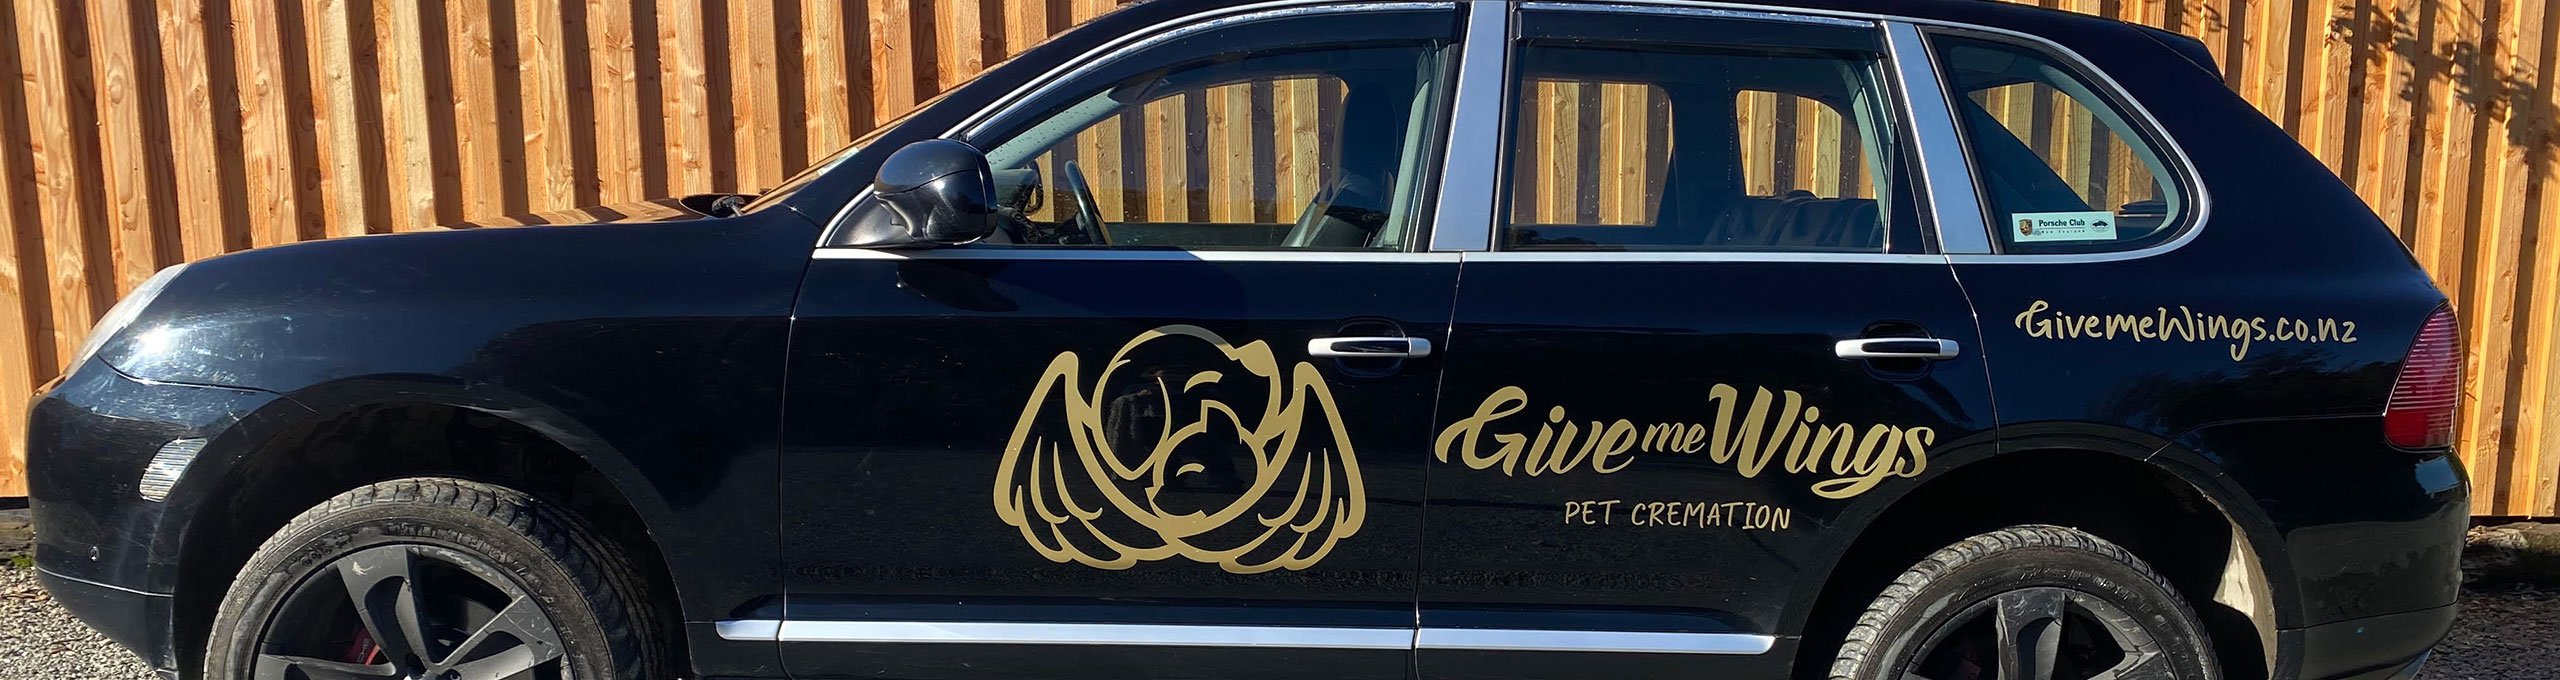 Contact Give me Wings Pet Cremation |Give me wings Banner